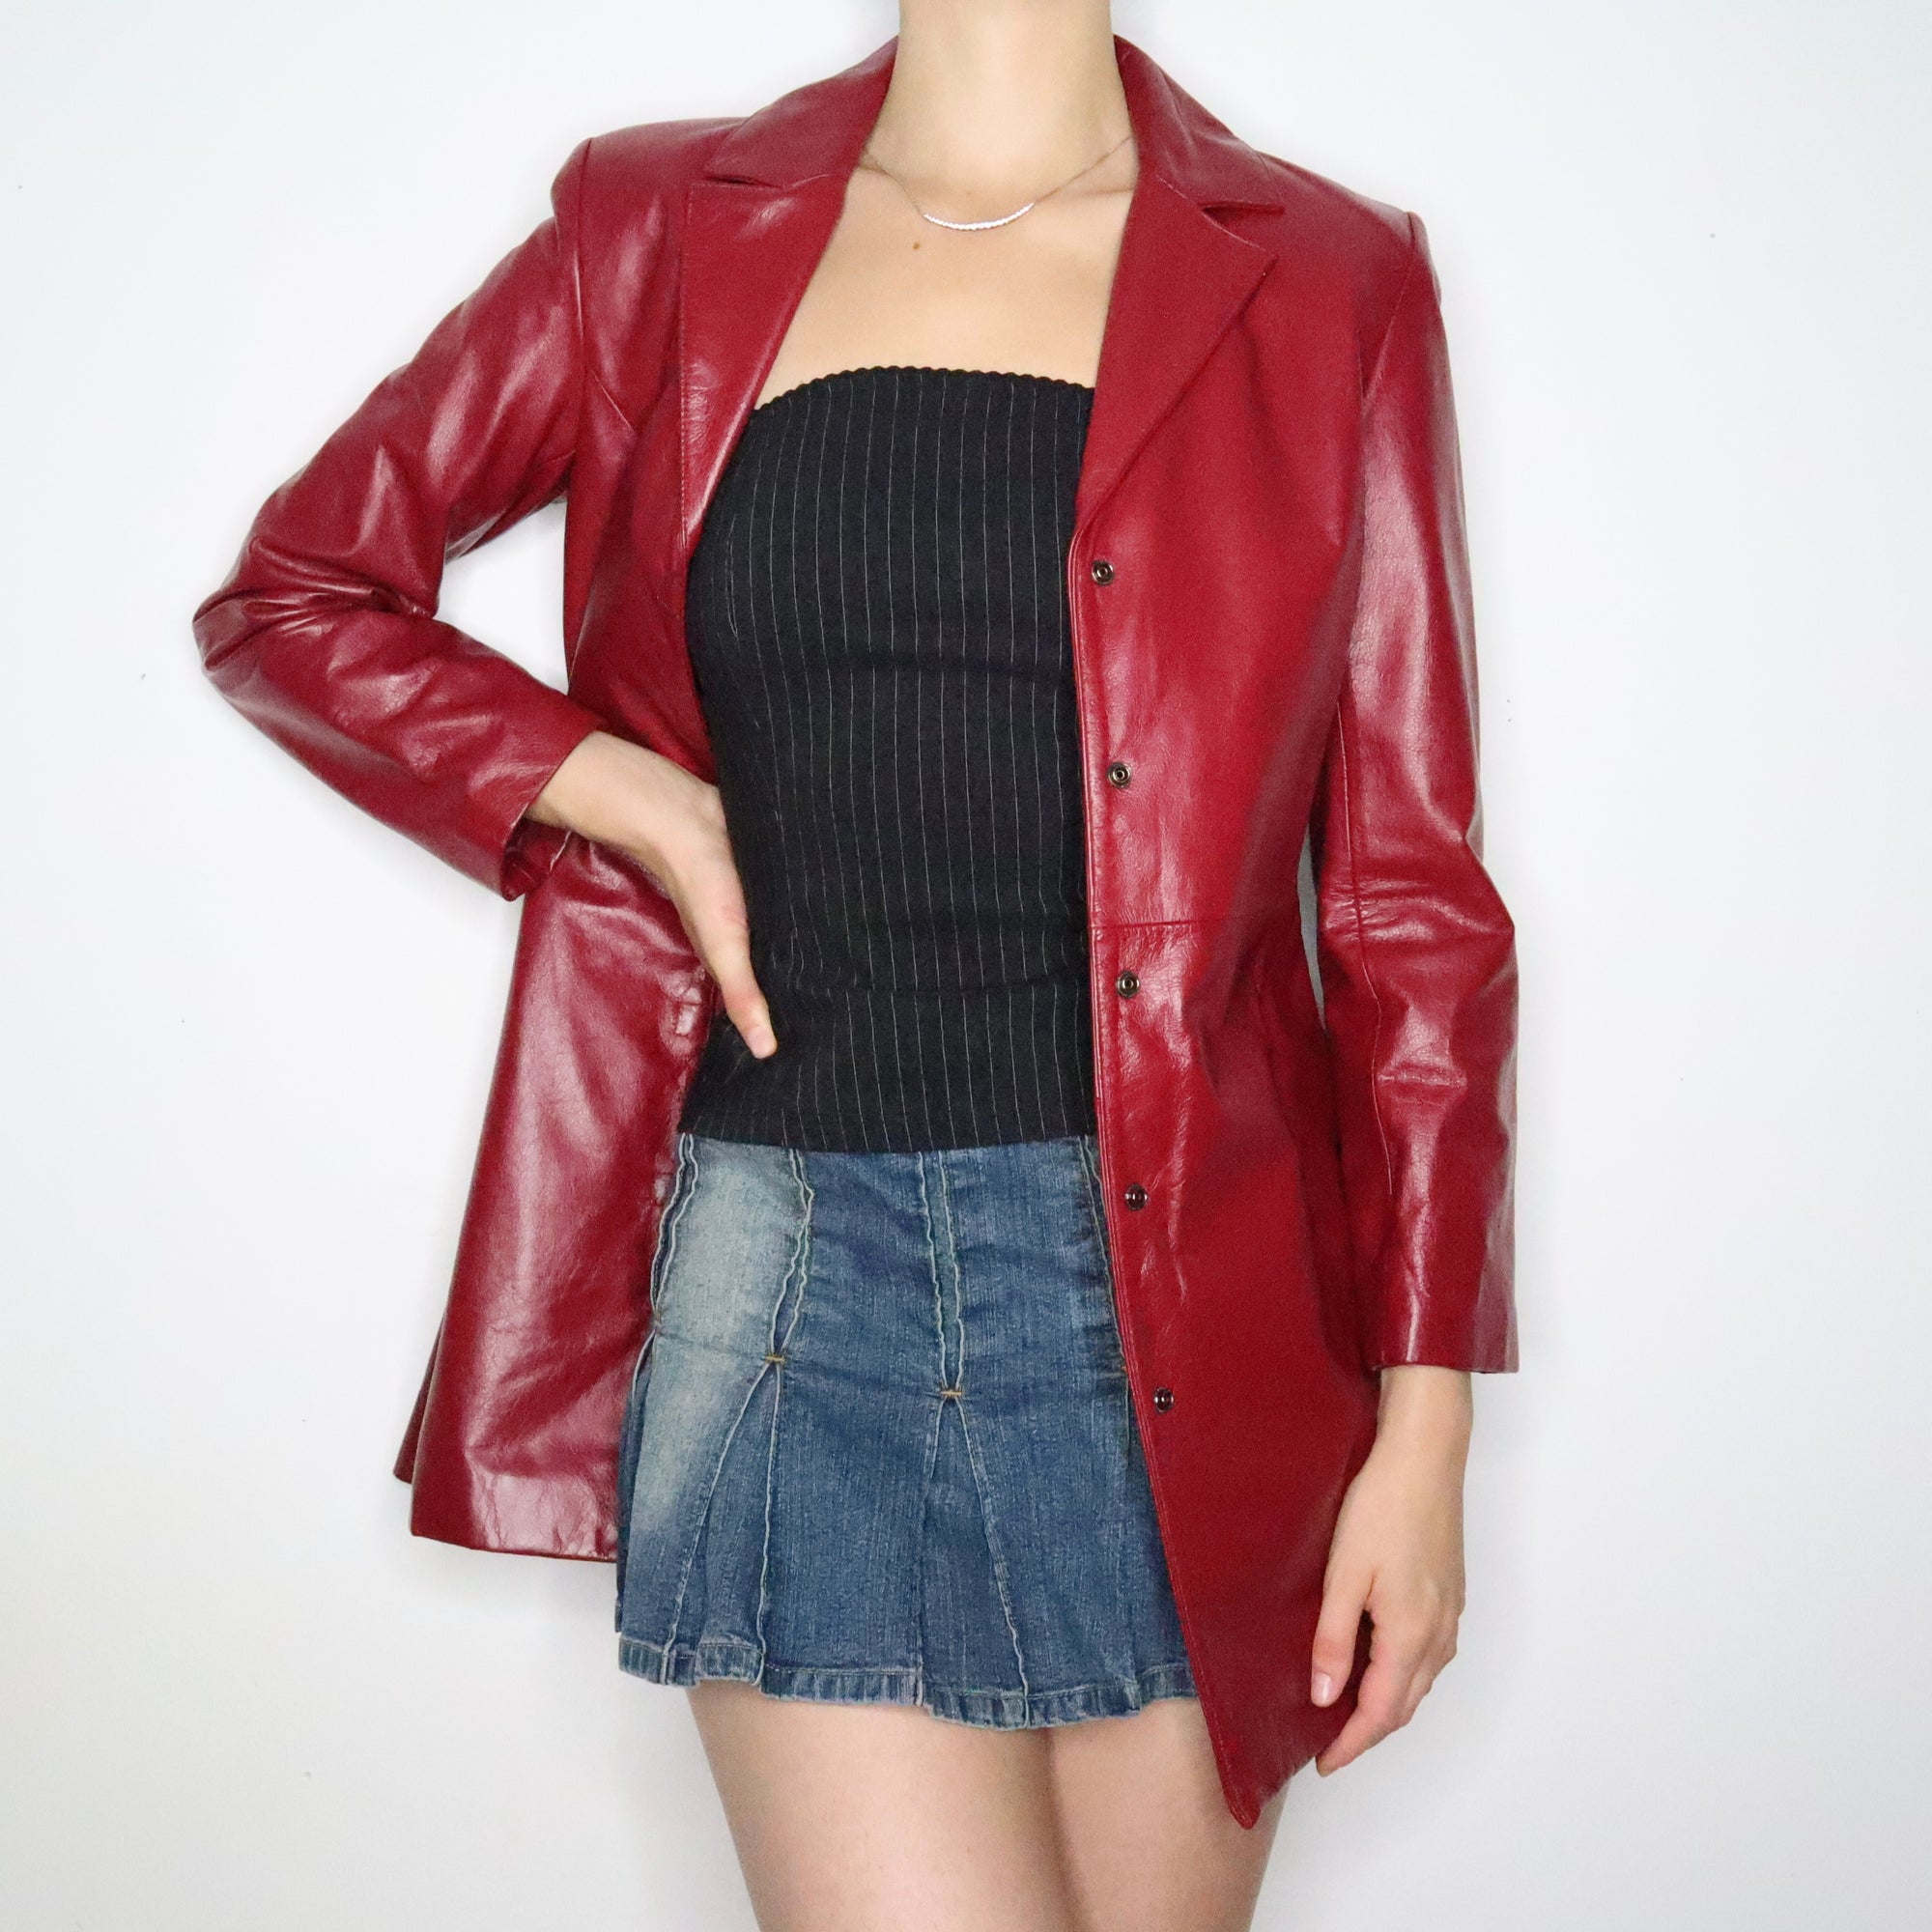 Buy TBOJ Ceery Color Faux Leather Jacket for Women (XX-Large) at Amazon.in